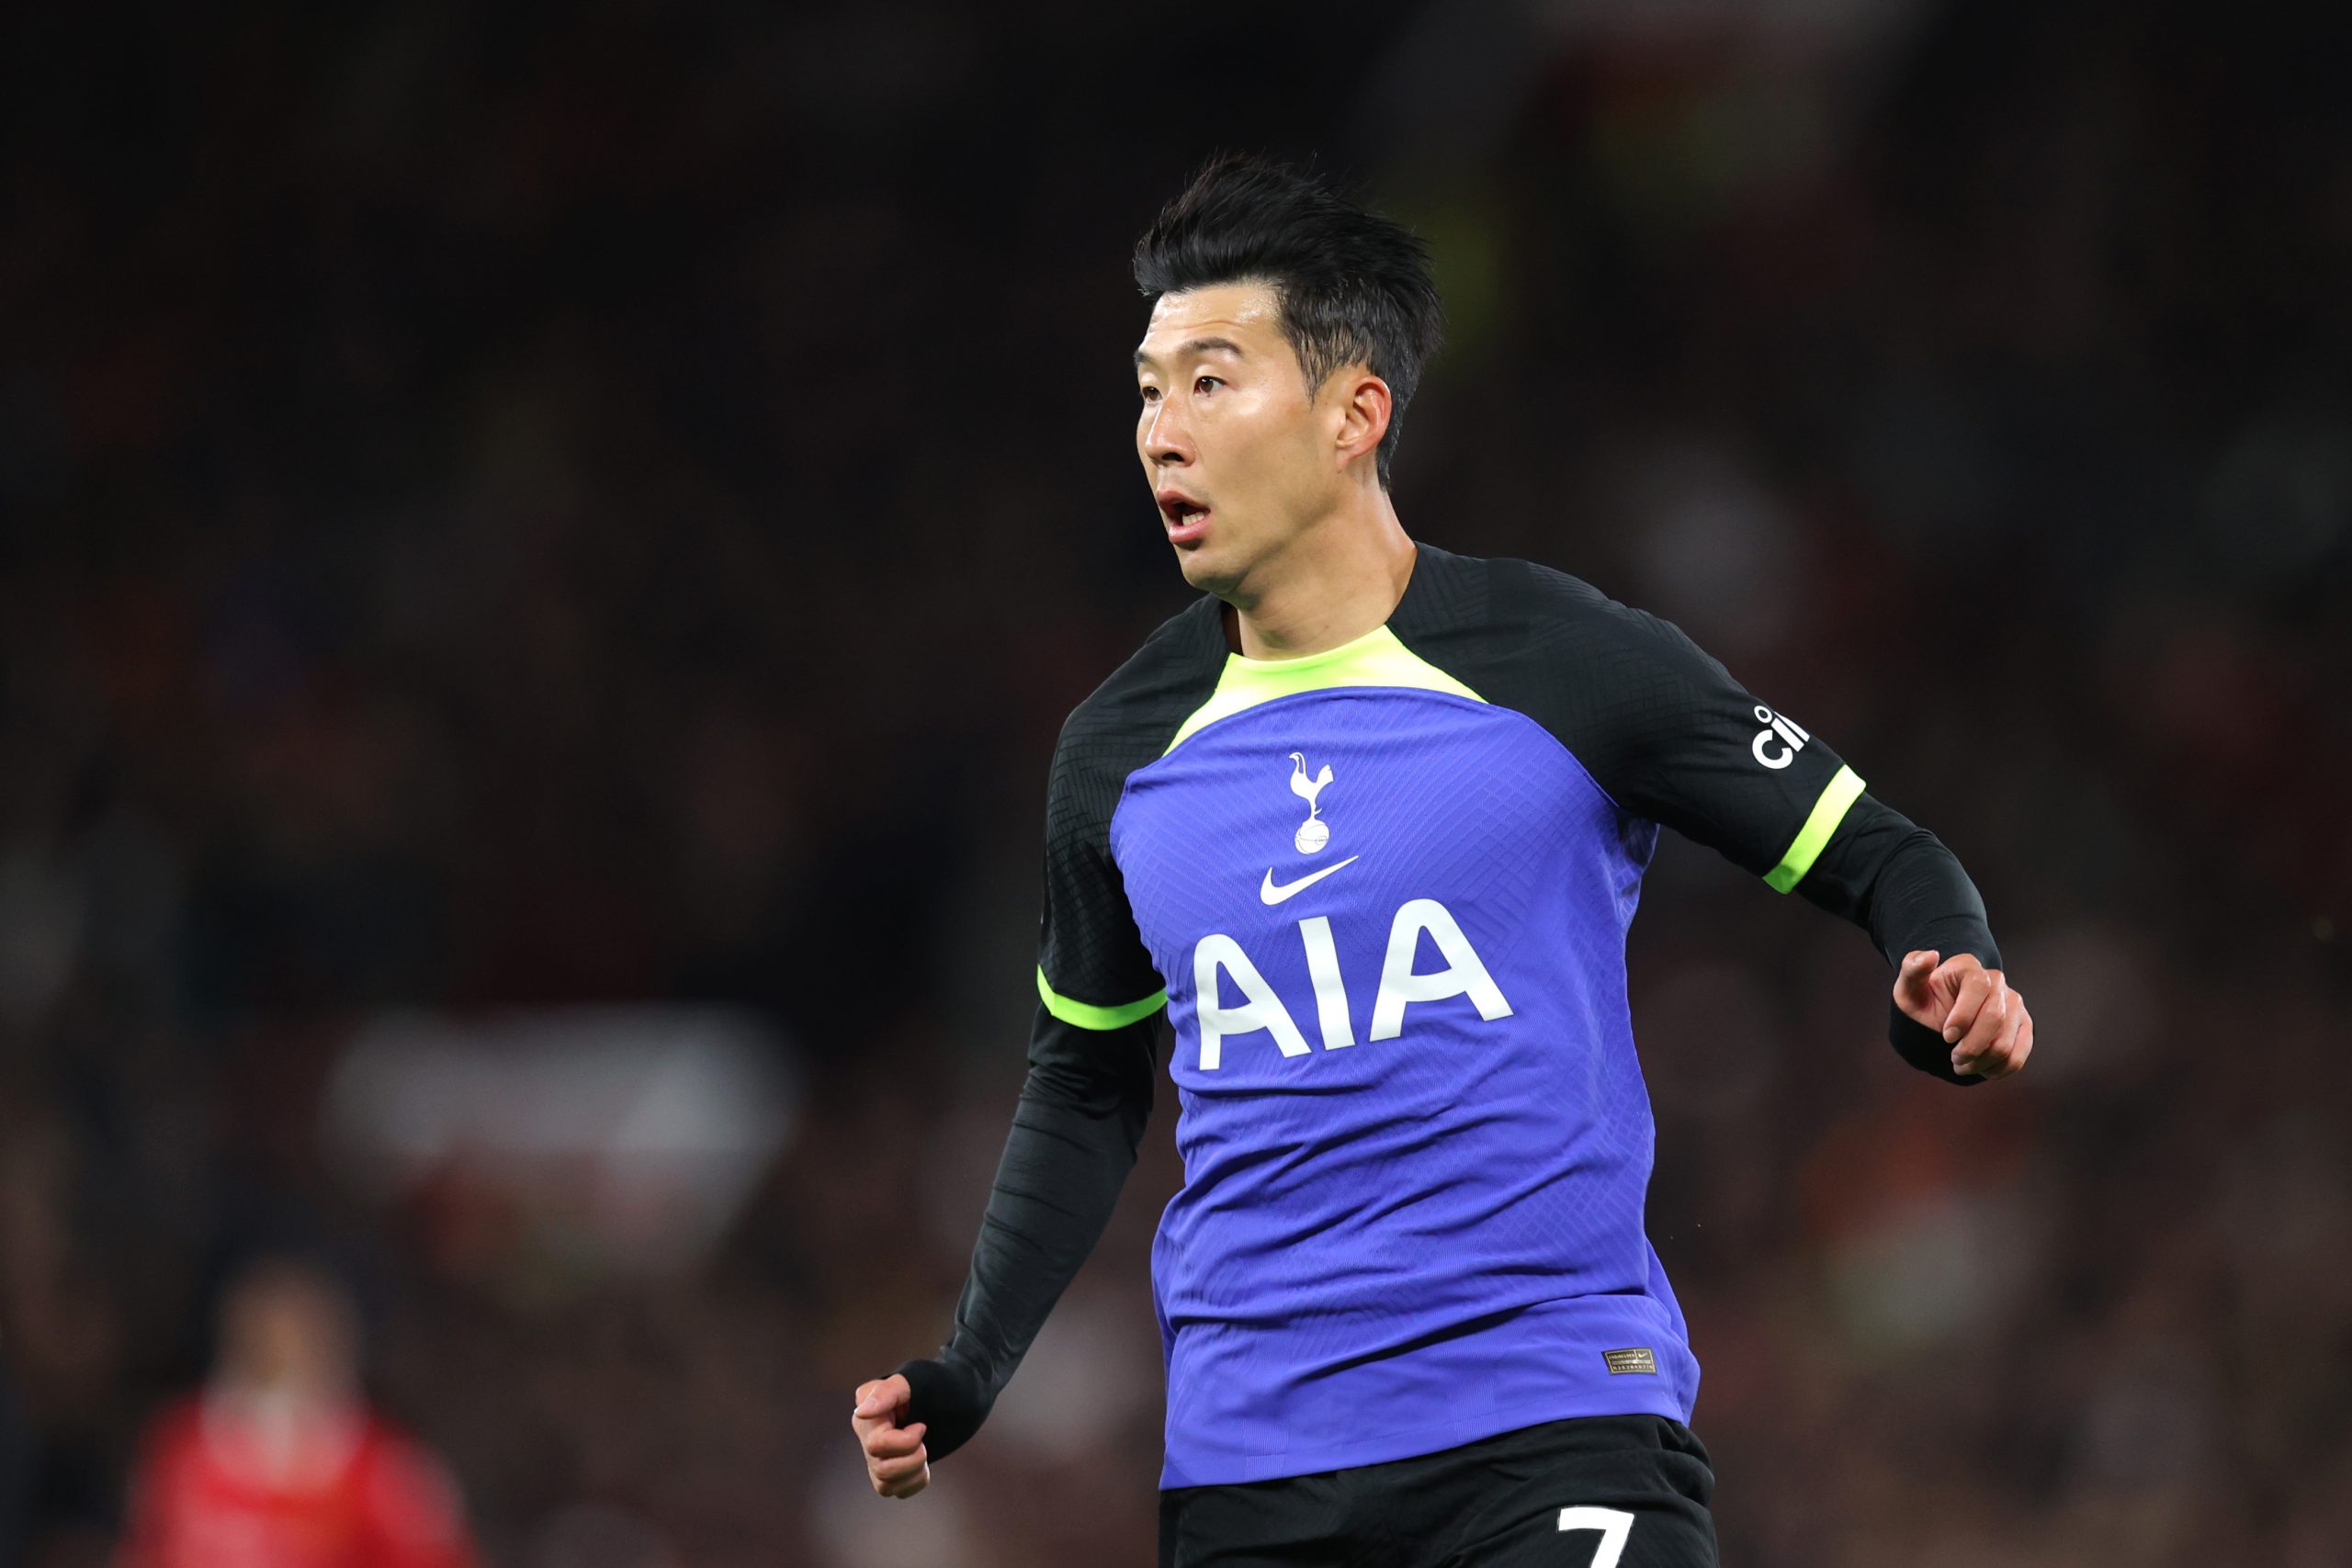 Tottenham star Son Heung-Min to undergo surgery after suffering four separate fractures to his eye socket.